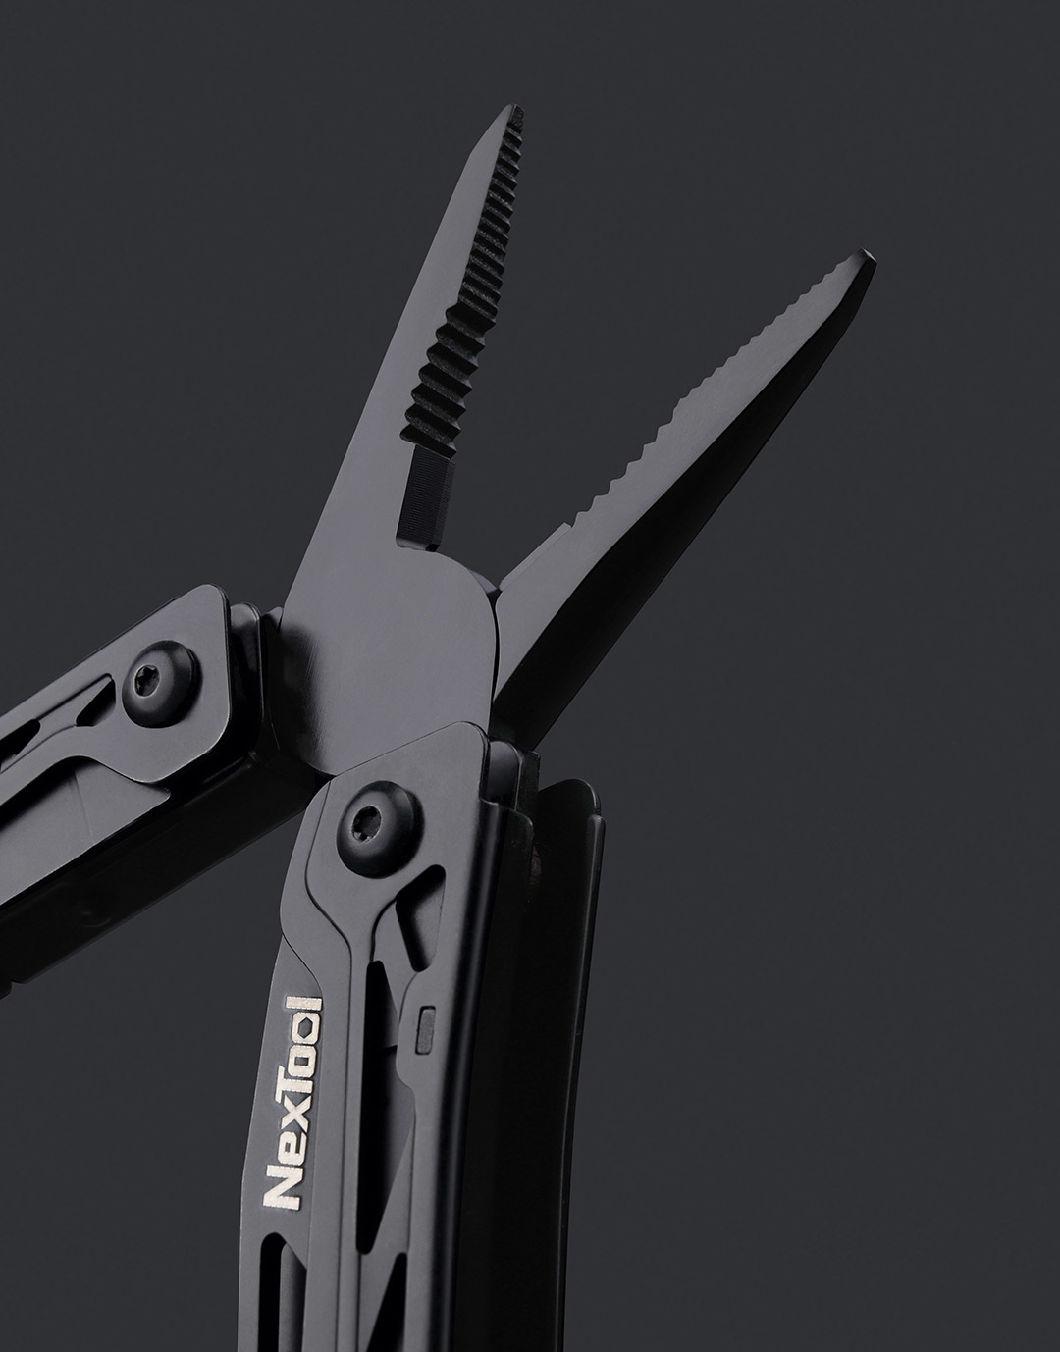 Nextool Black Coating Shears Design Multitool with Knife Saw Pliers